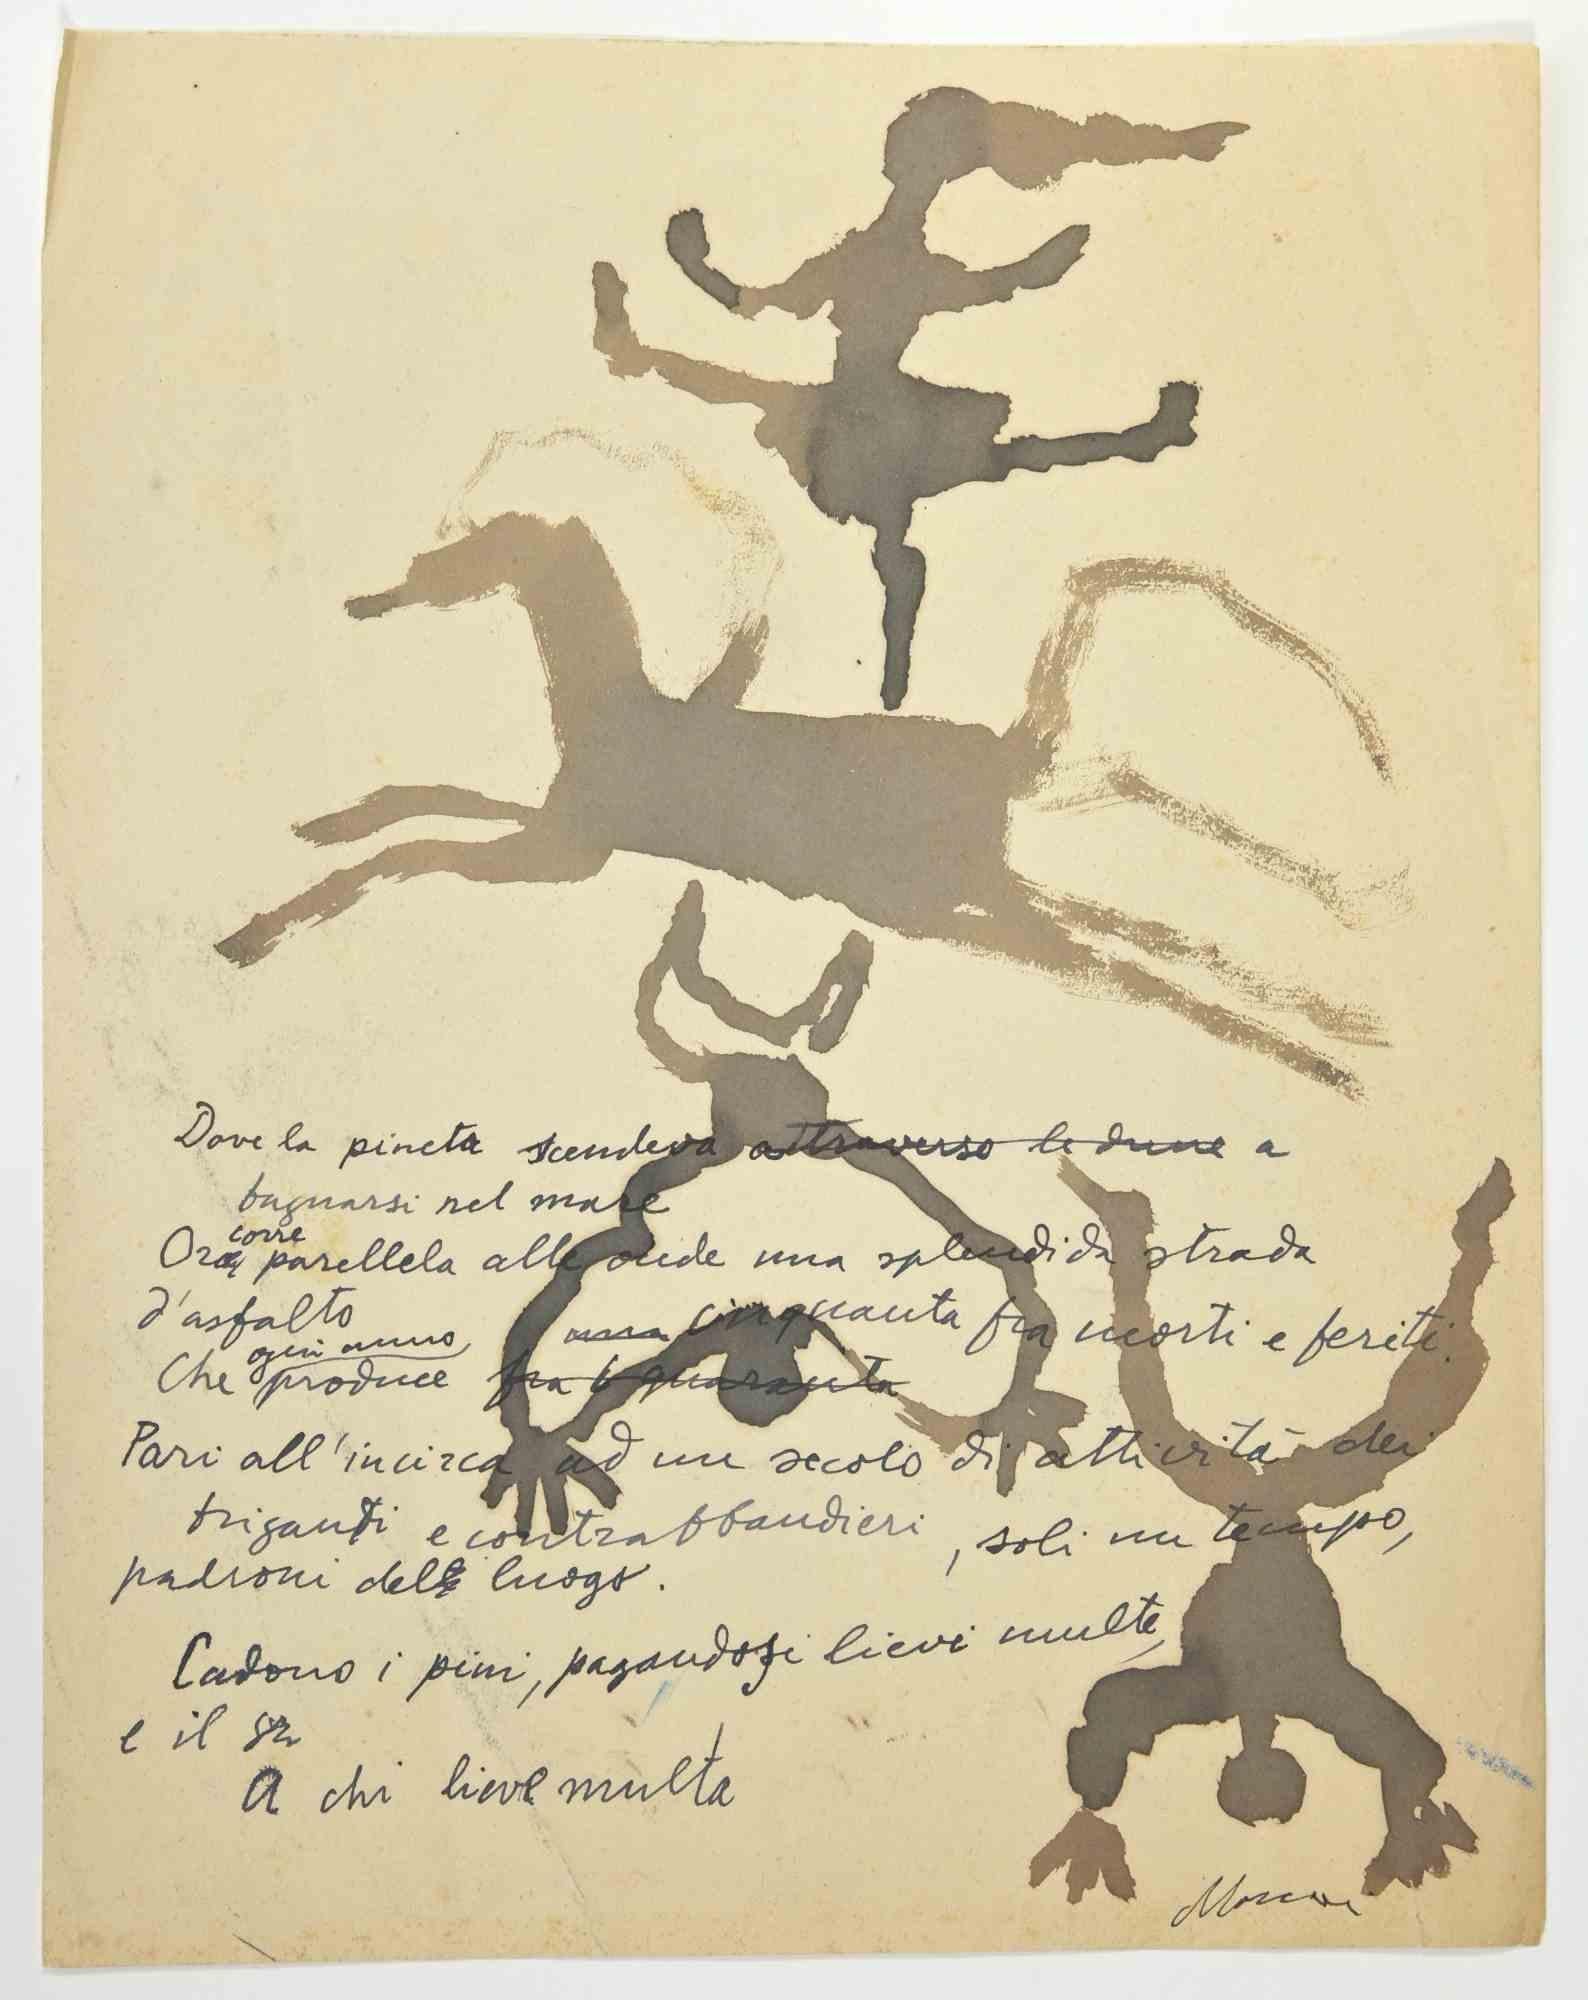 Horse Riders is a Watercolor Drawing realized by Mino Maccari  (1924-1989) in the 1960s.

Hand-signed on the lower.

Good conditions with slight folding.

Mino Maccari (Siena, 1924-Rome, June 16, 1989) was an Italian writer, painter, engraver and